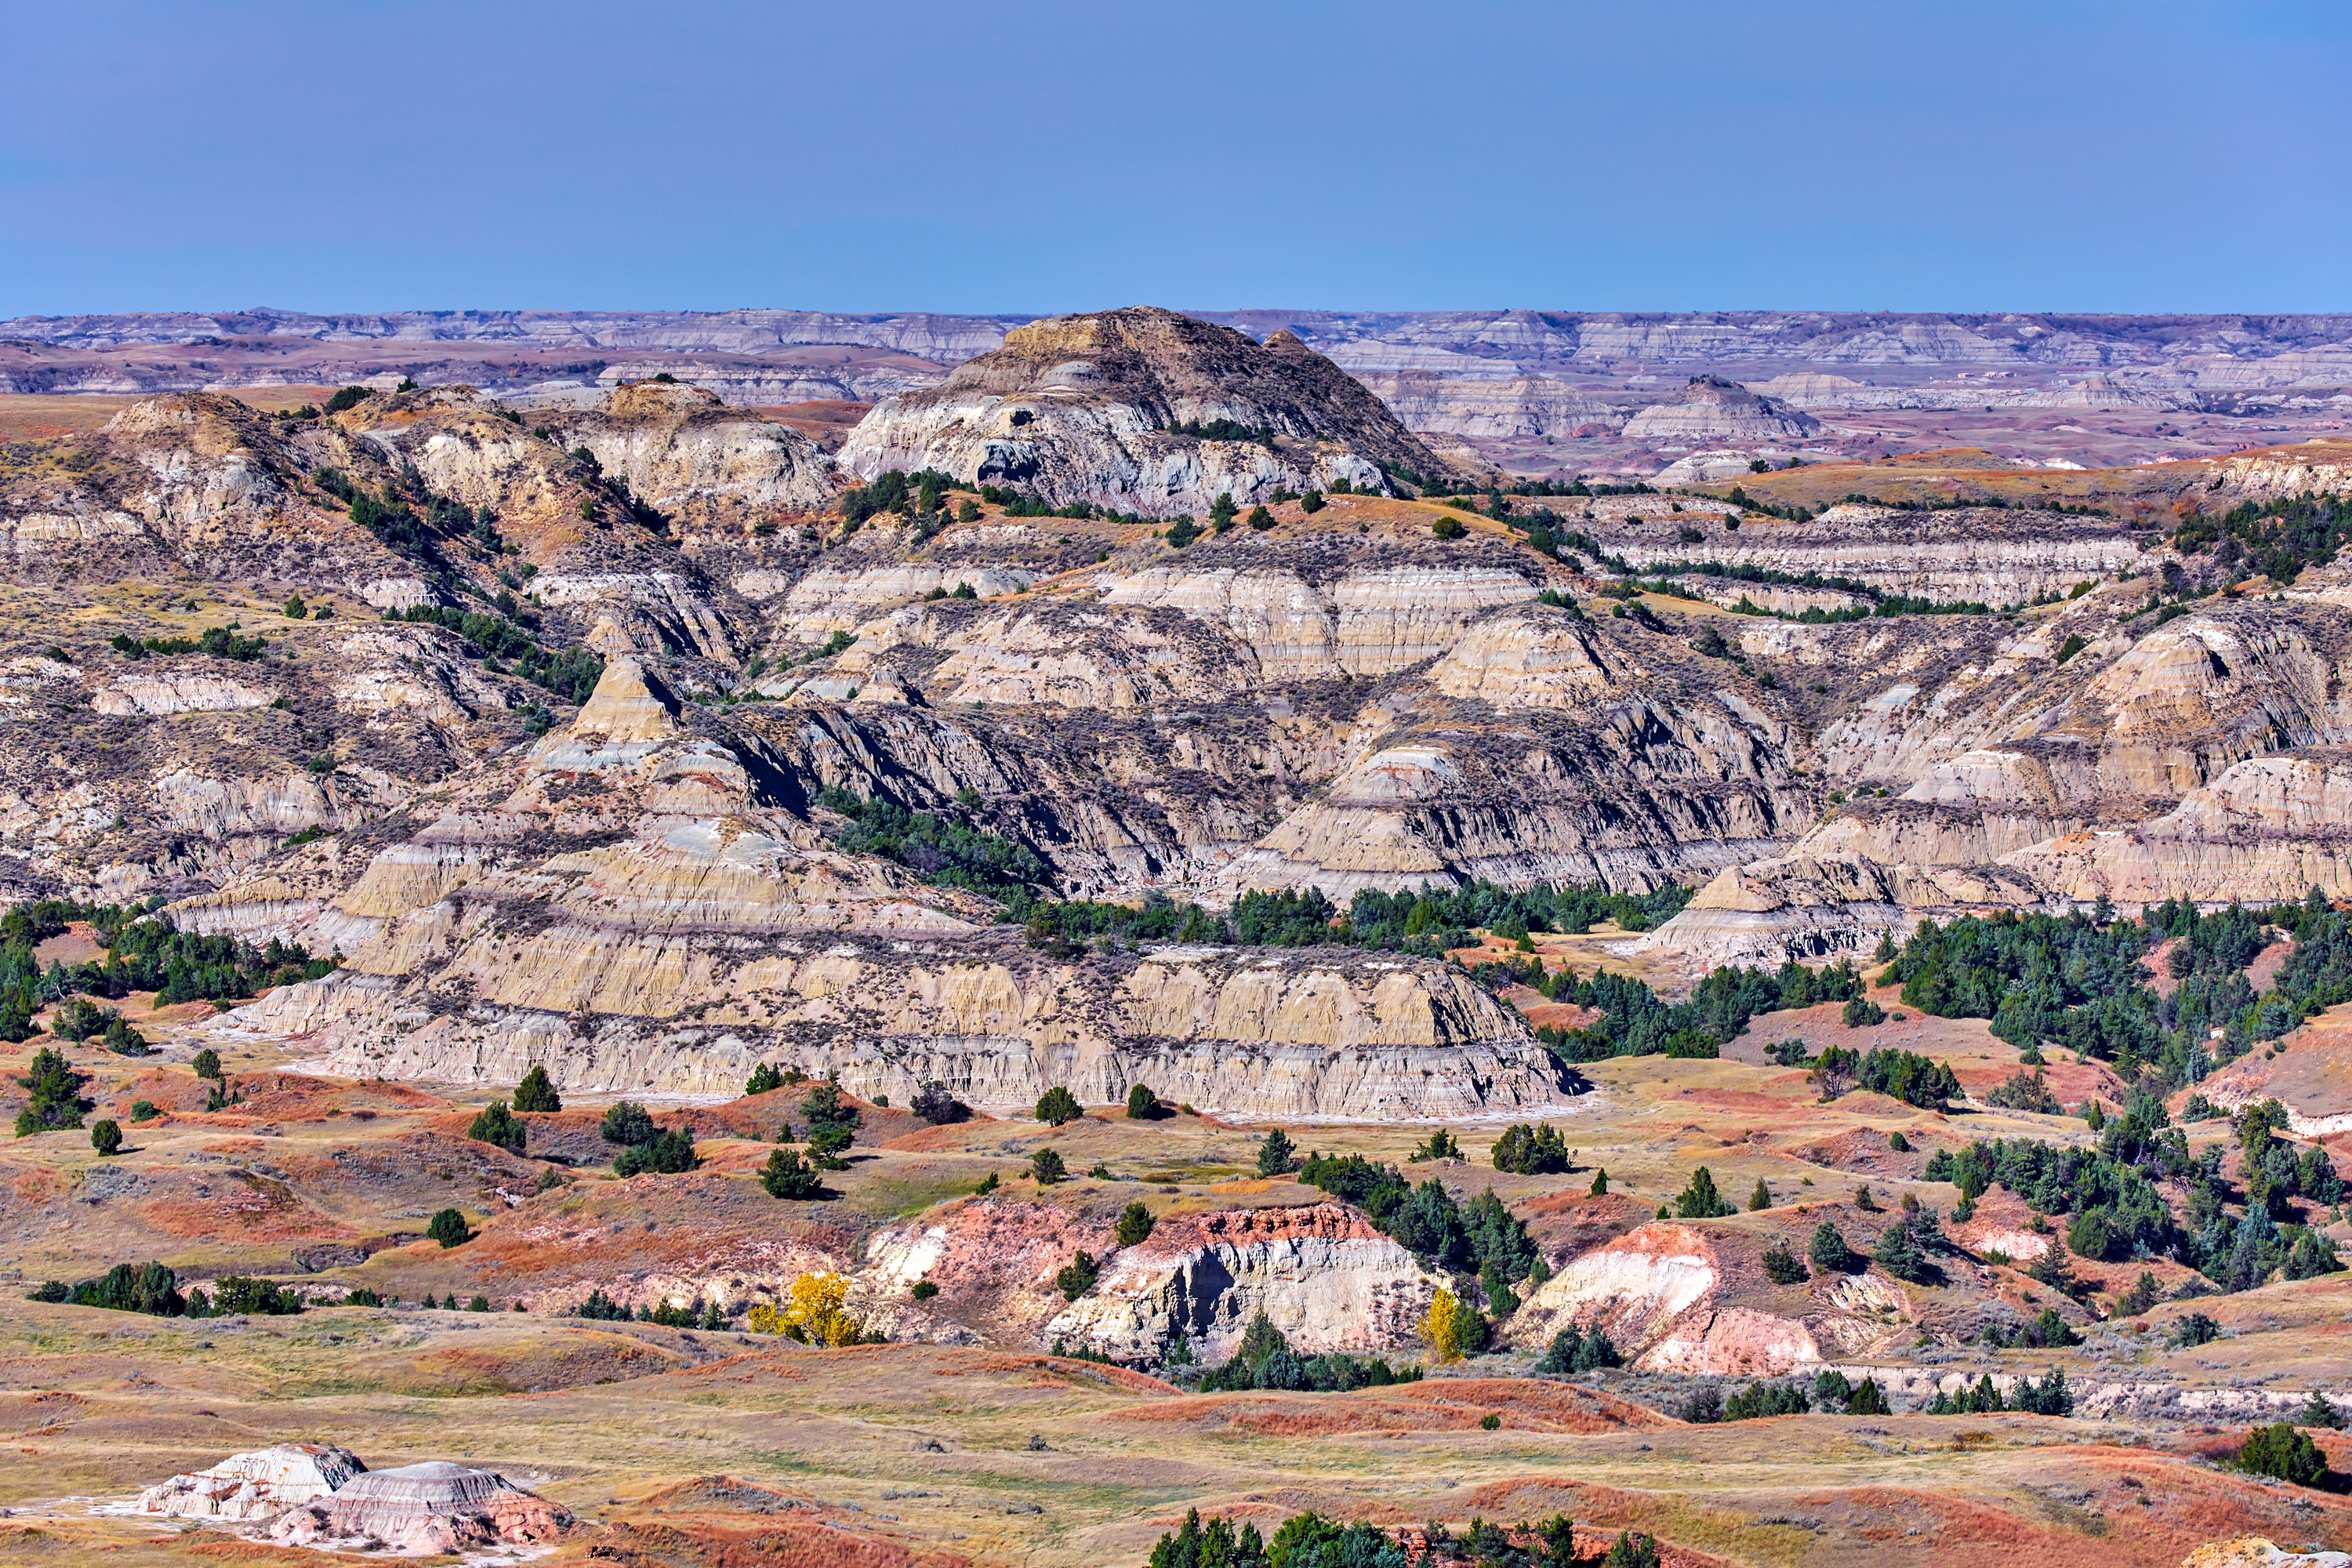 Mountains in the Badlands